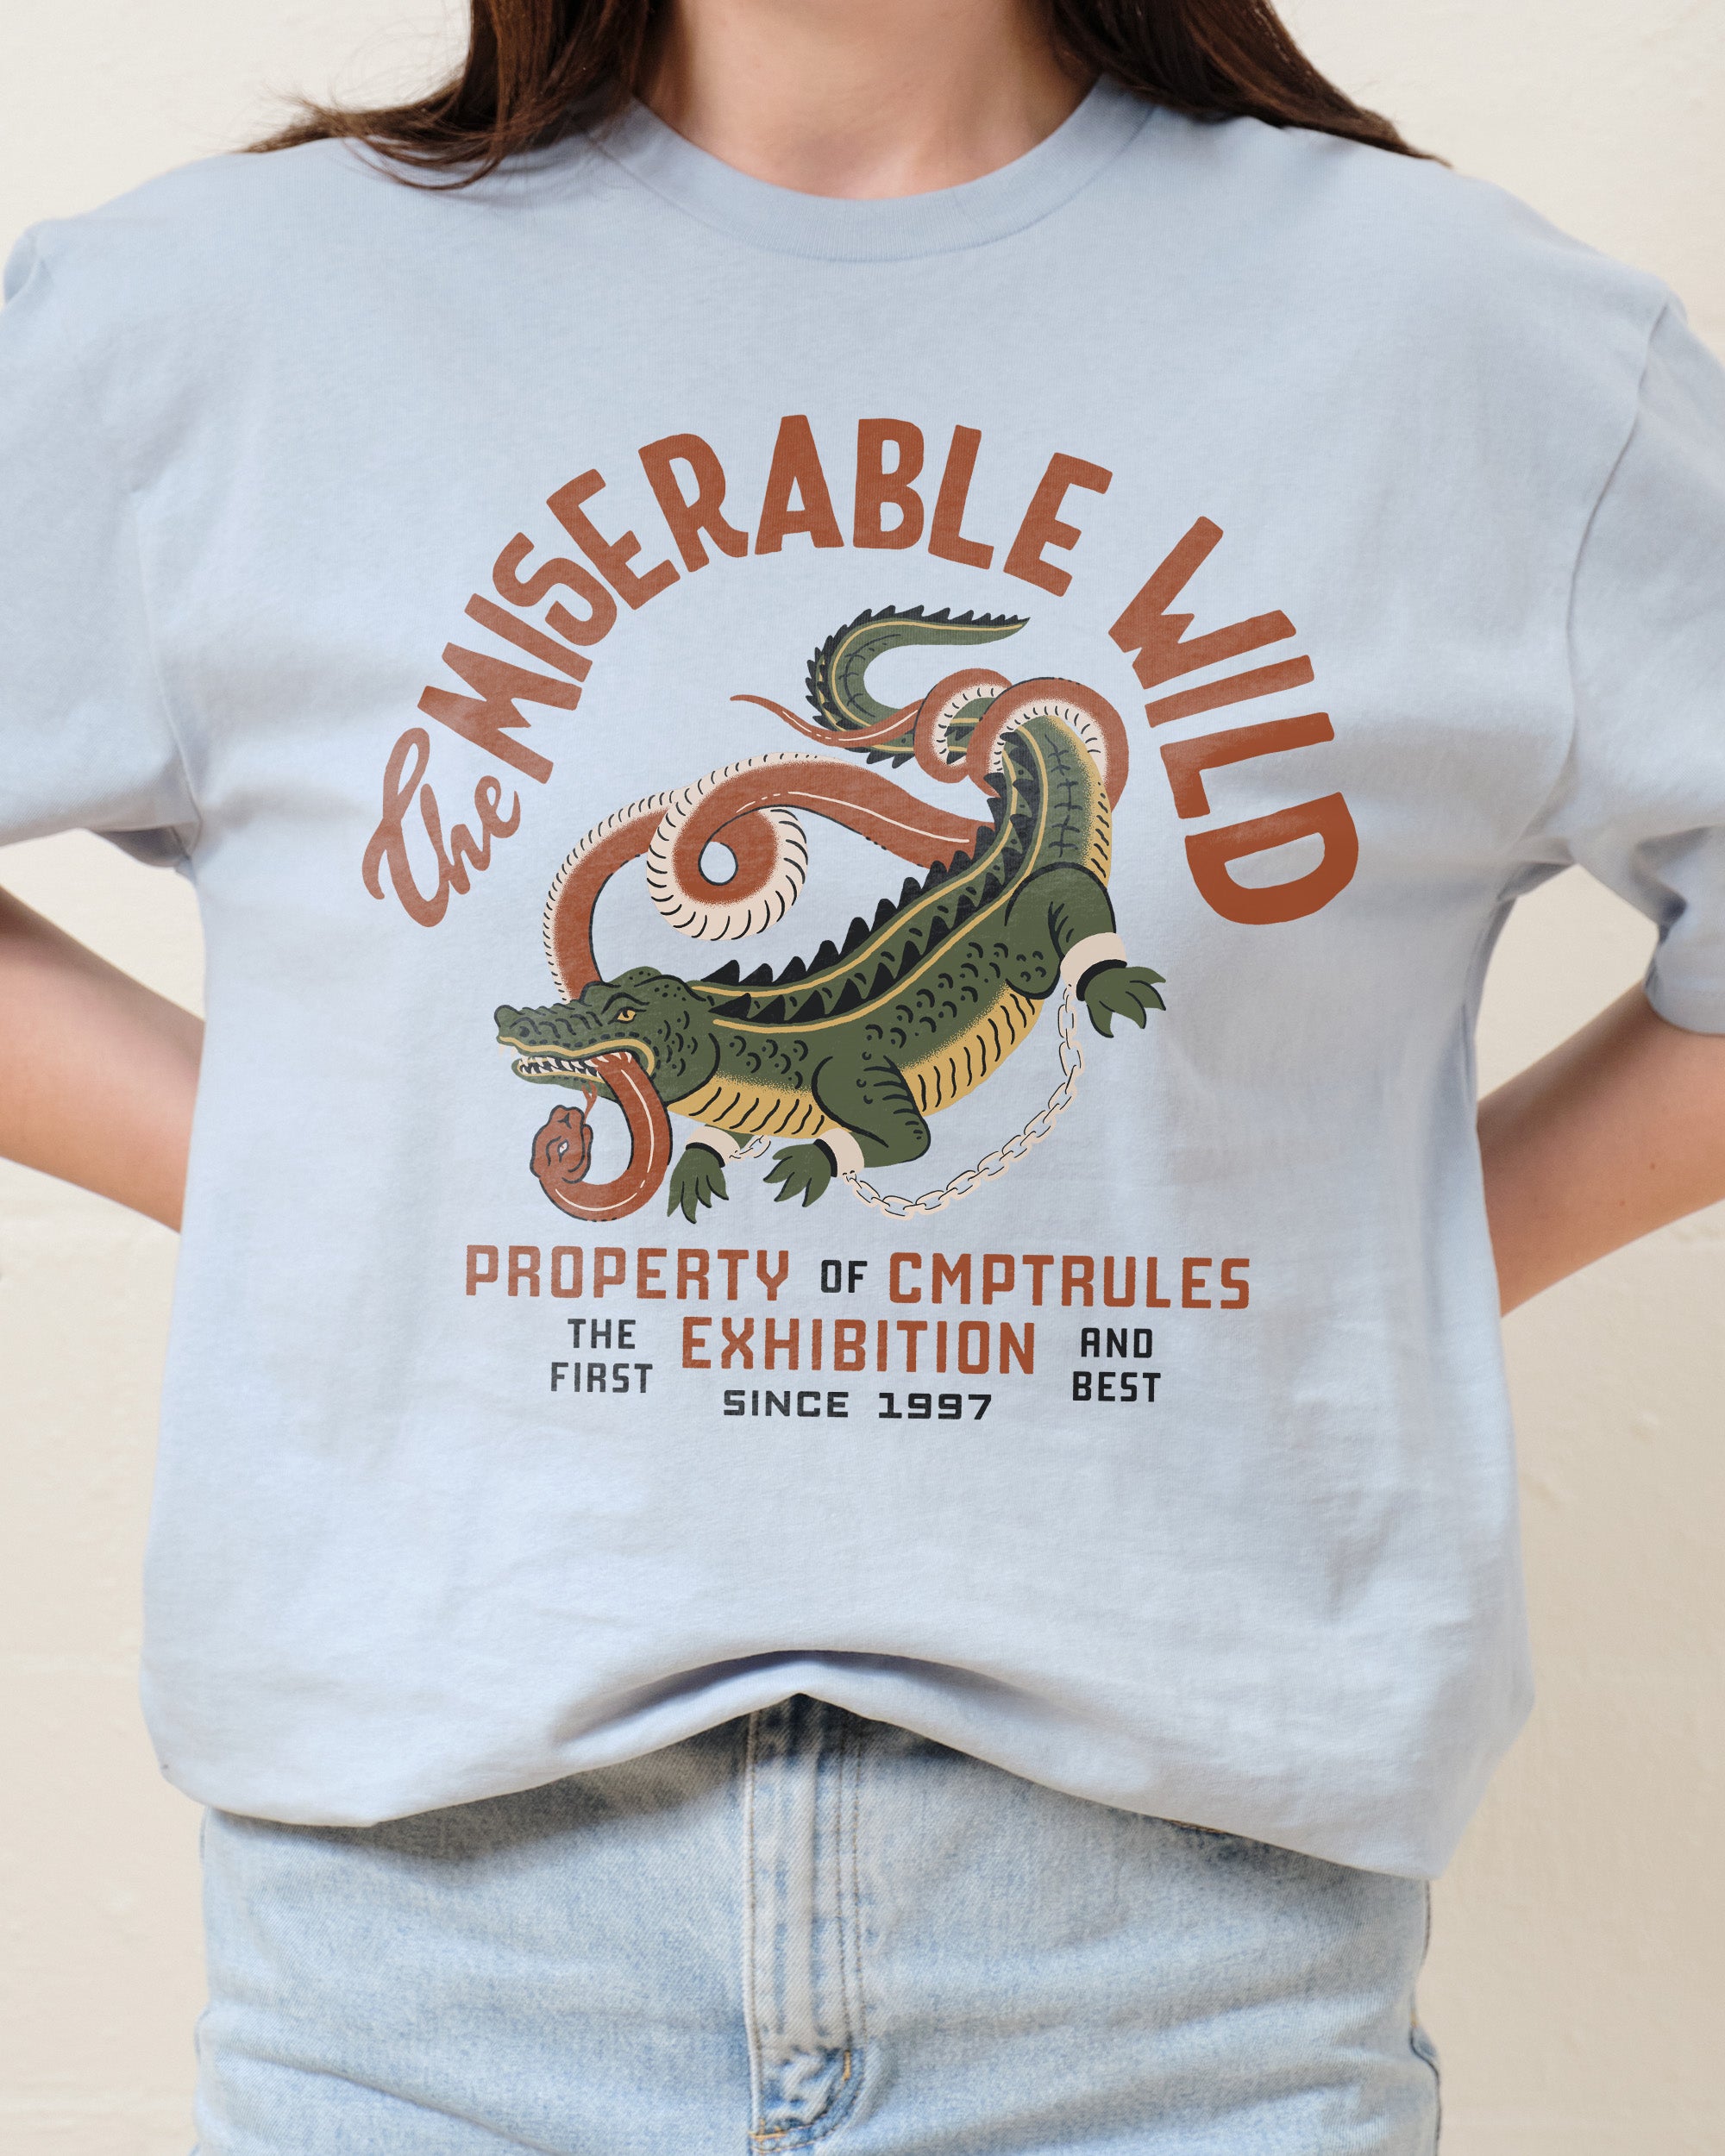 The Miserable Wild T-Shirt